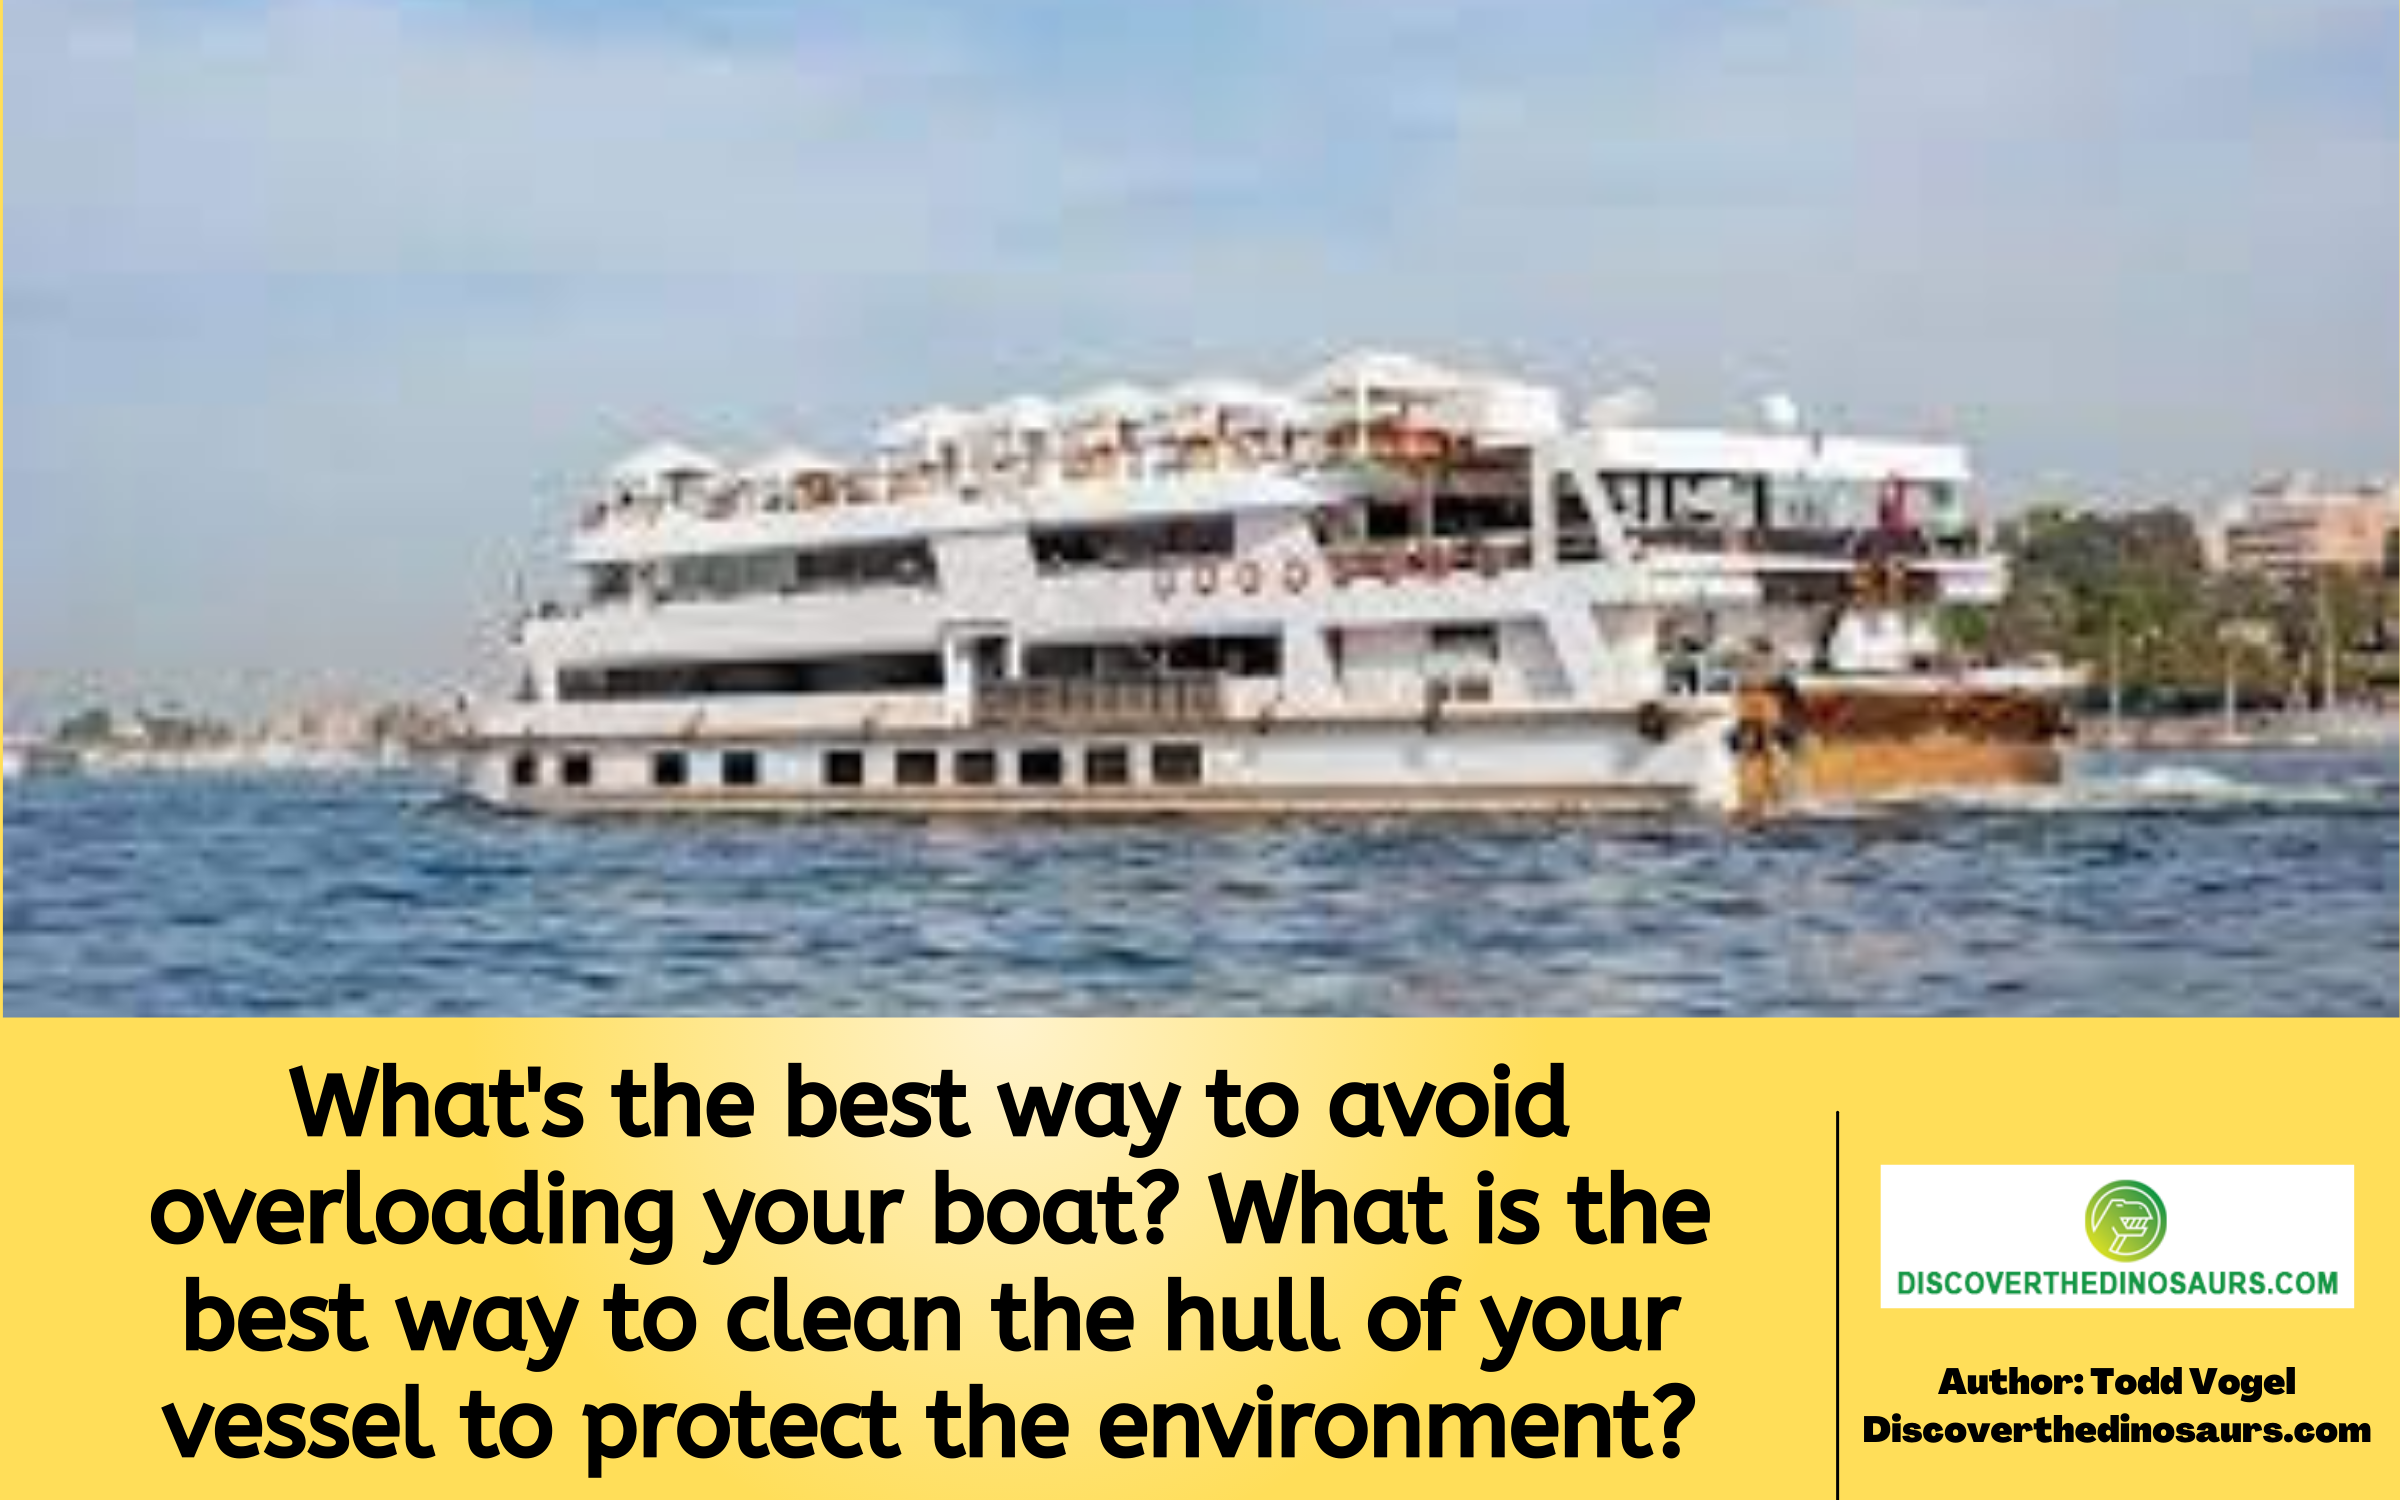 What's the best way to avoid overloading your boat? What is the best way to clean the hull of your vessel to protect the environment?